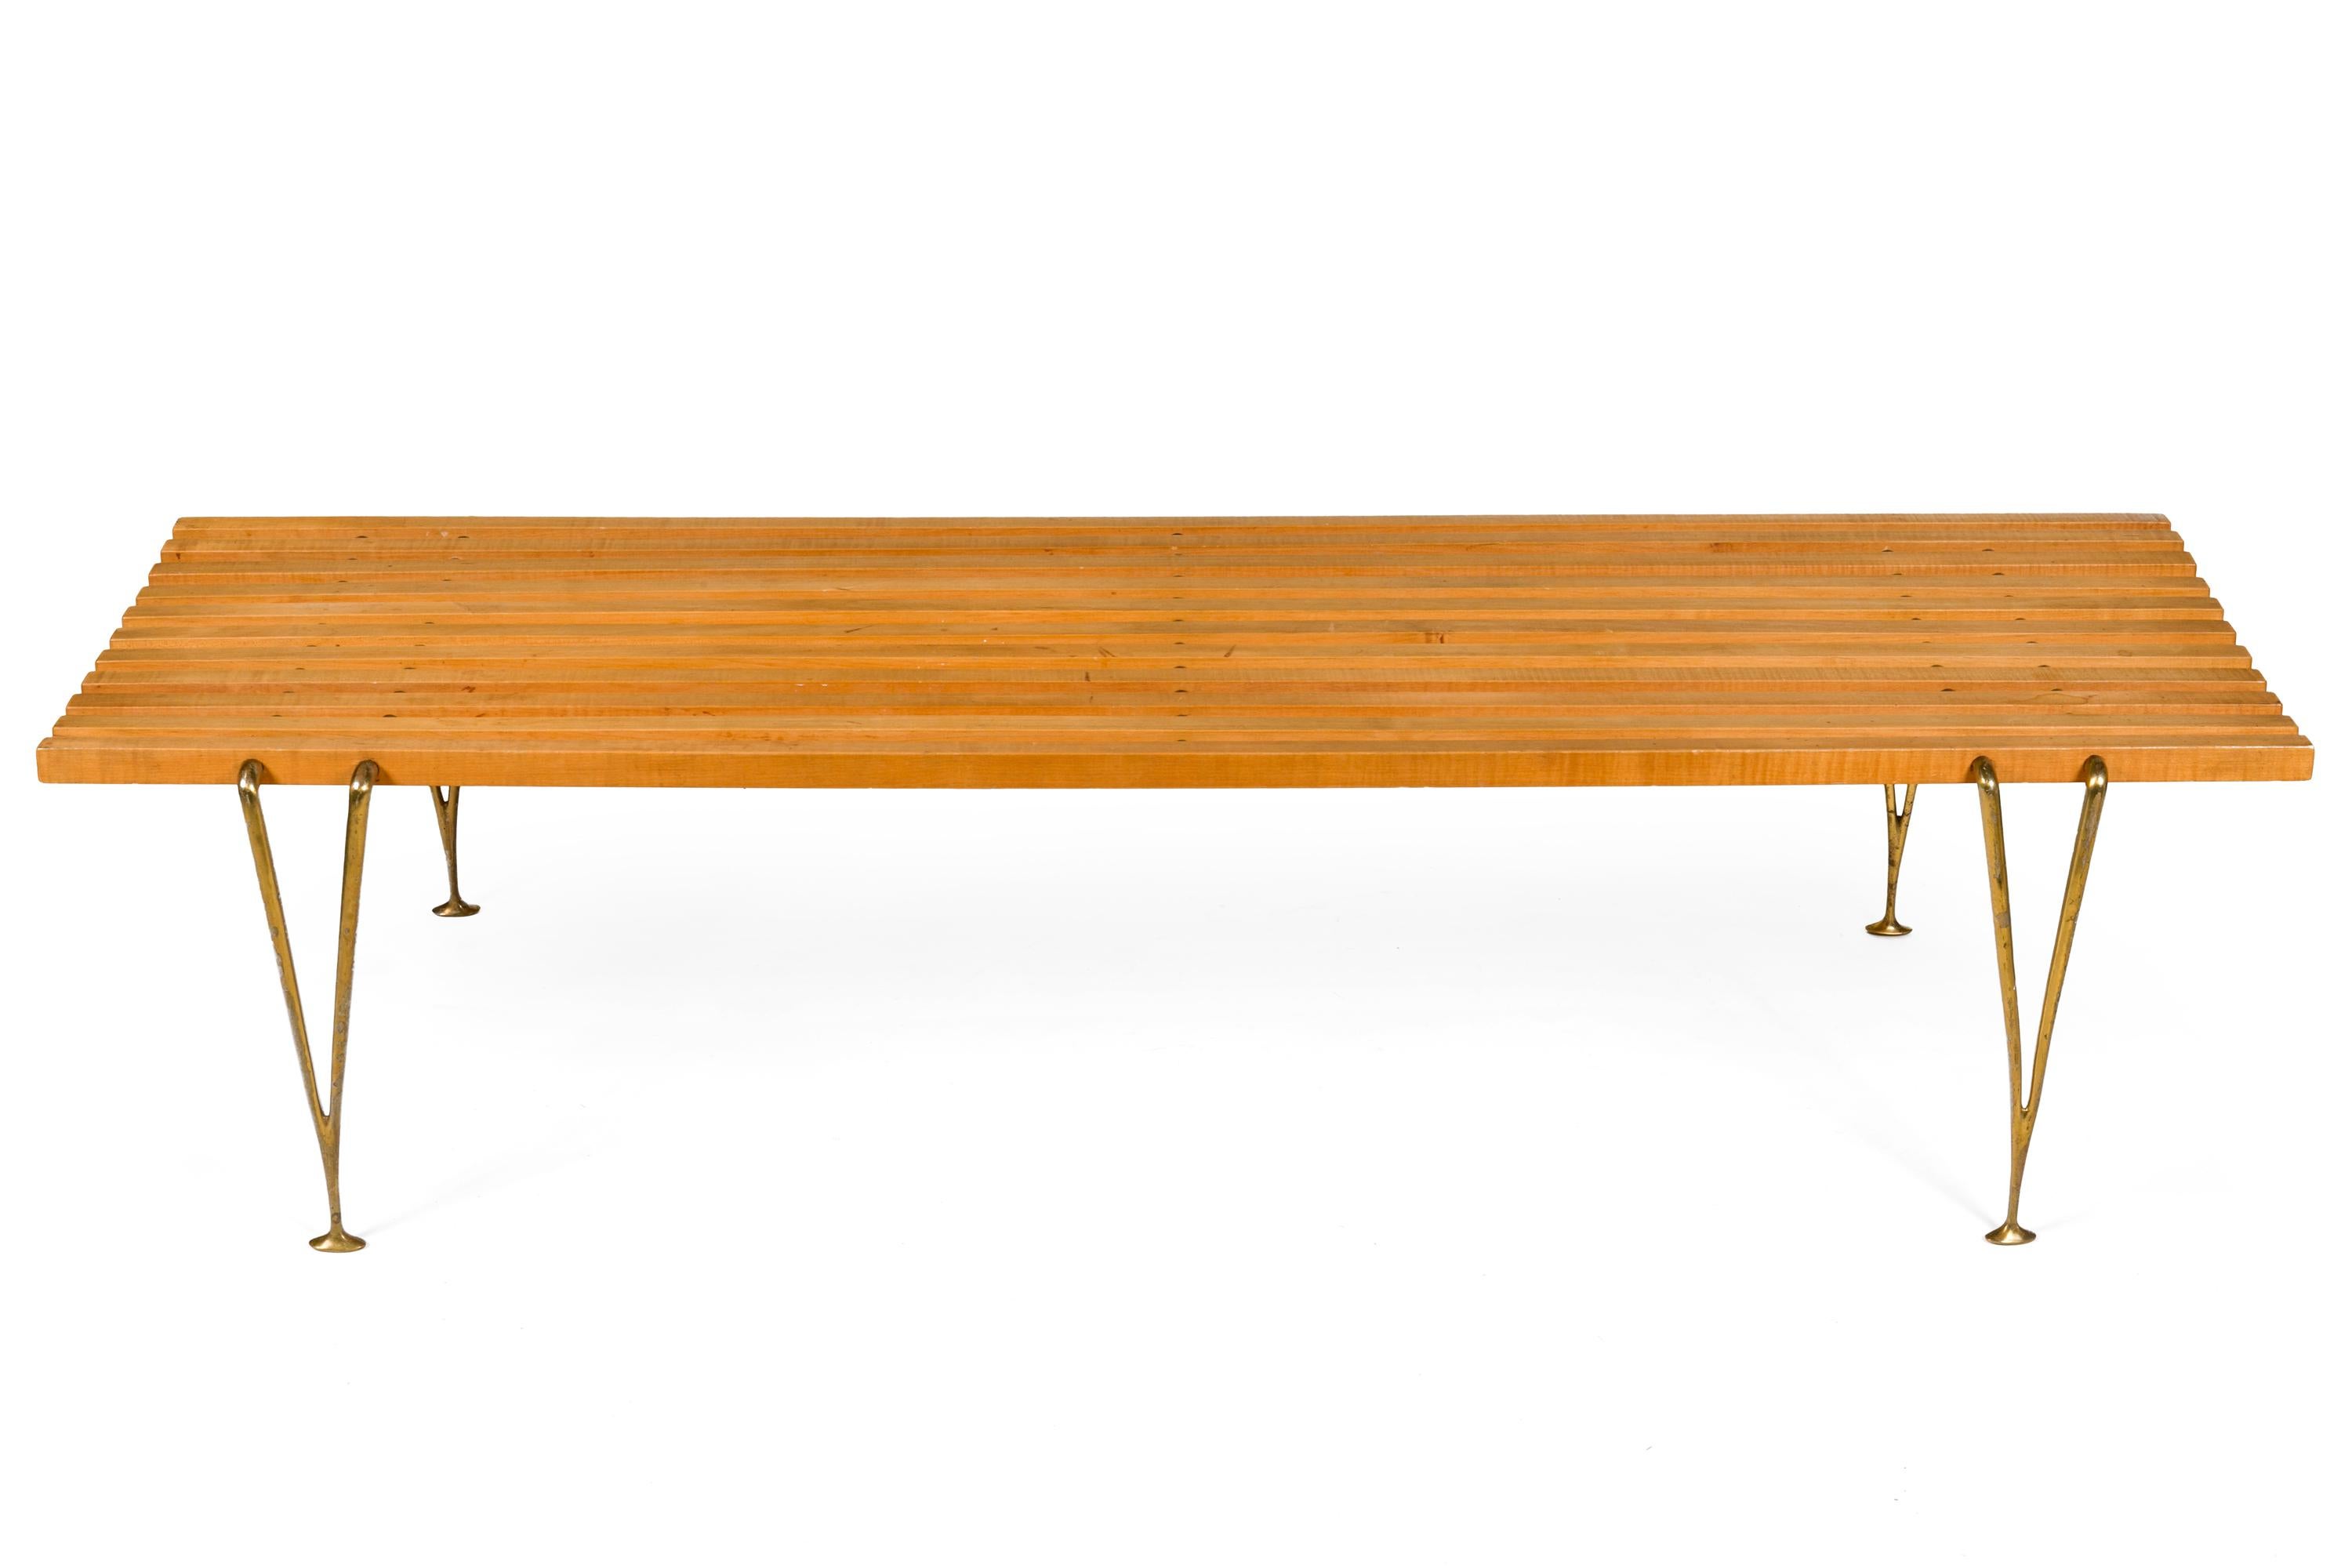 An iconic design by one of many midcentury furniture designers to have graduated from the renown Cranbrook Academy of Art.